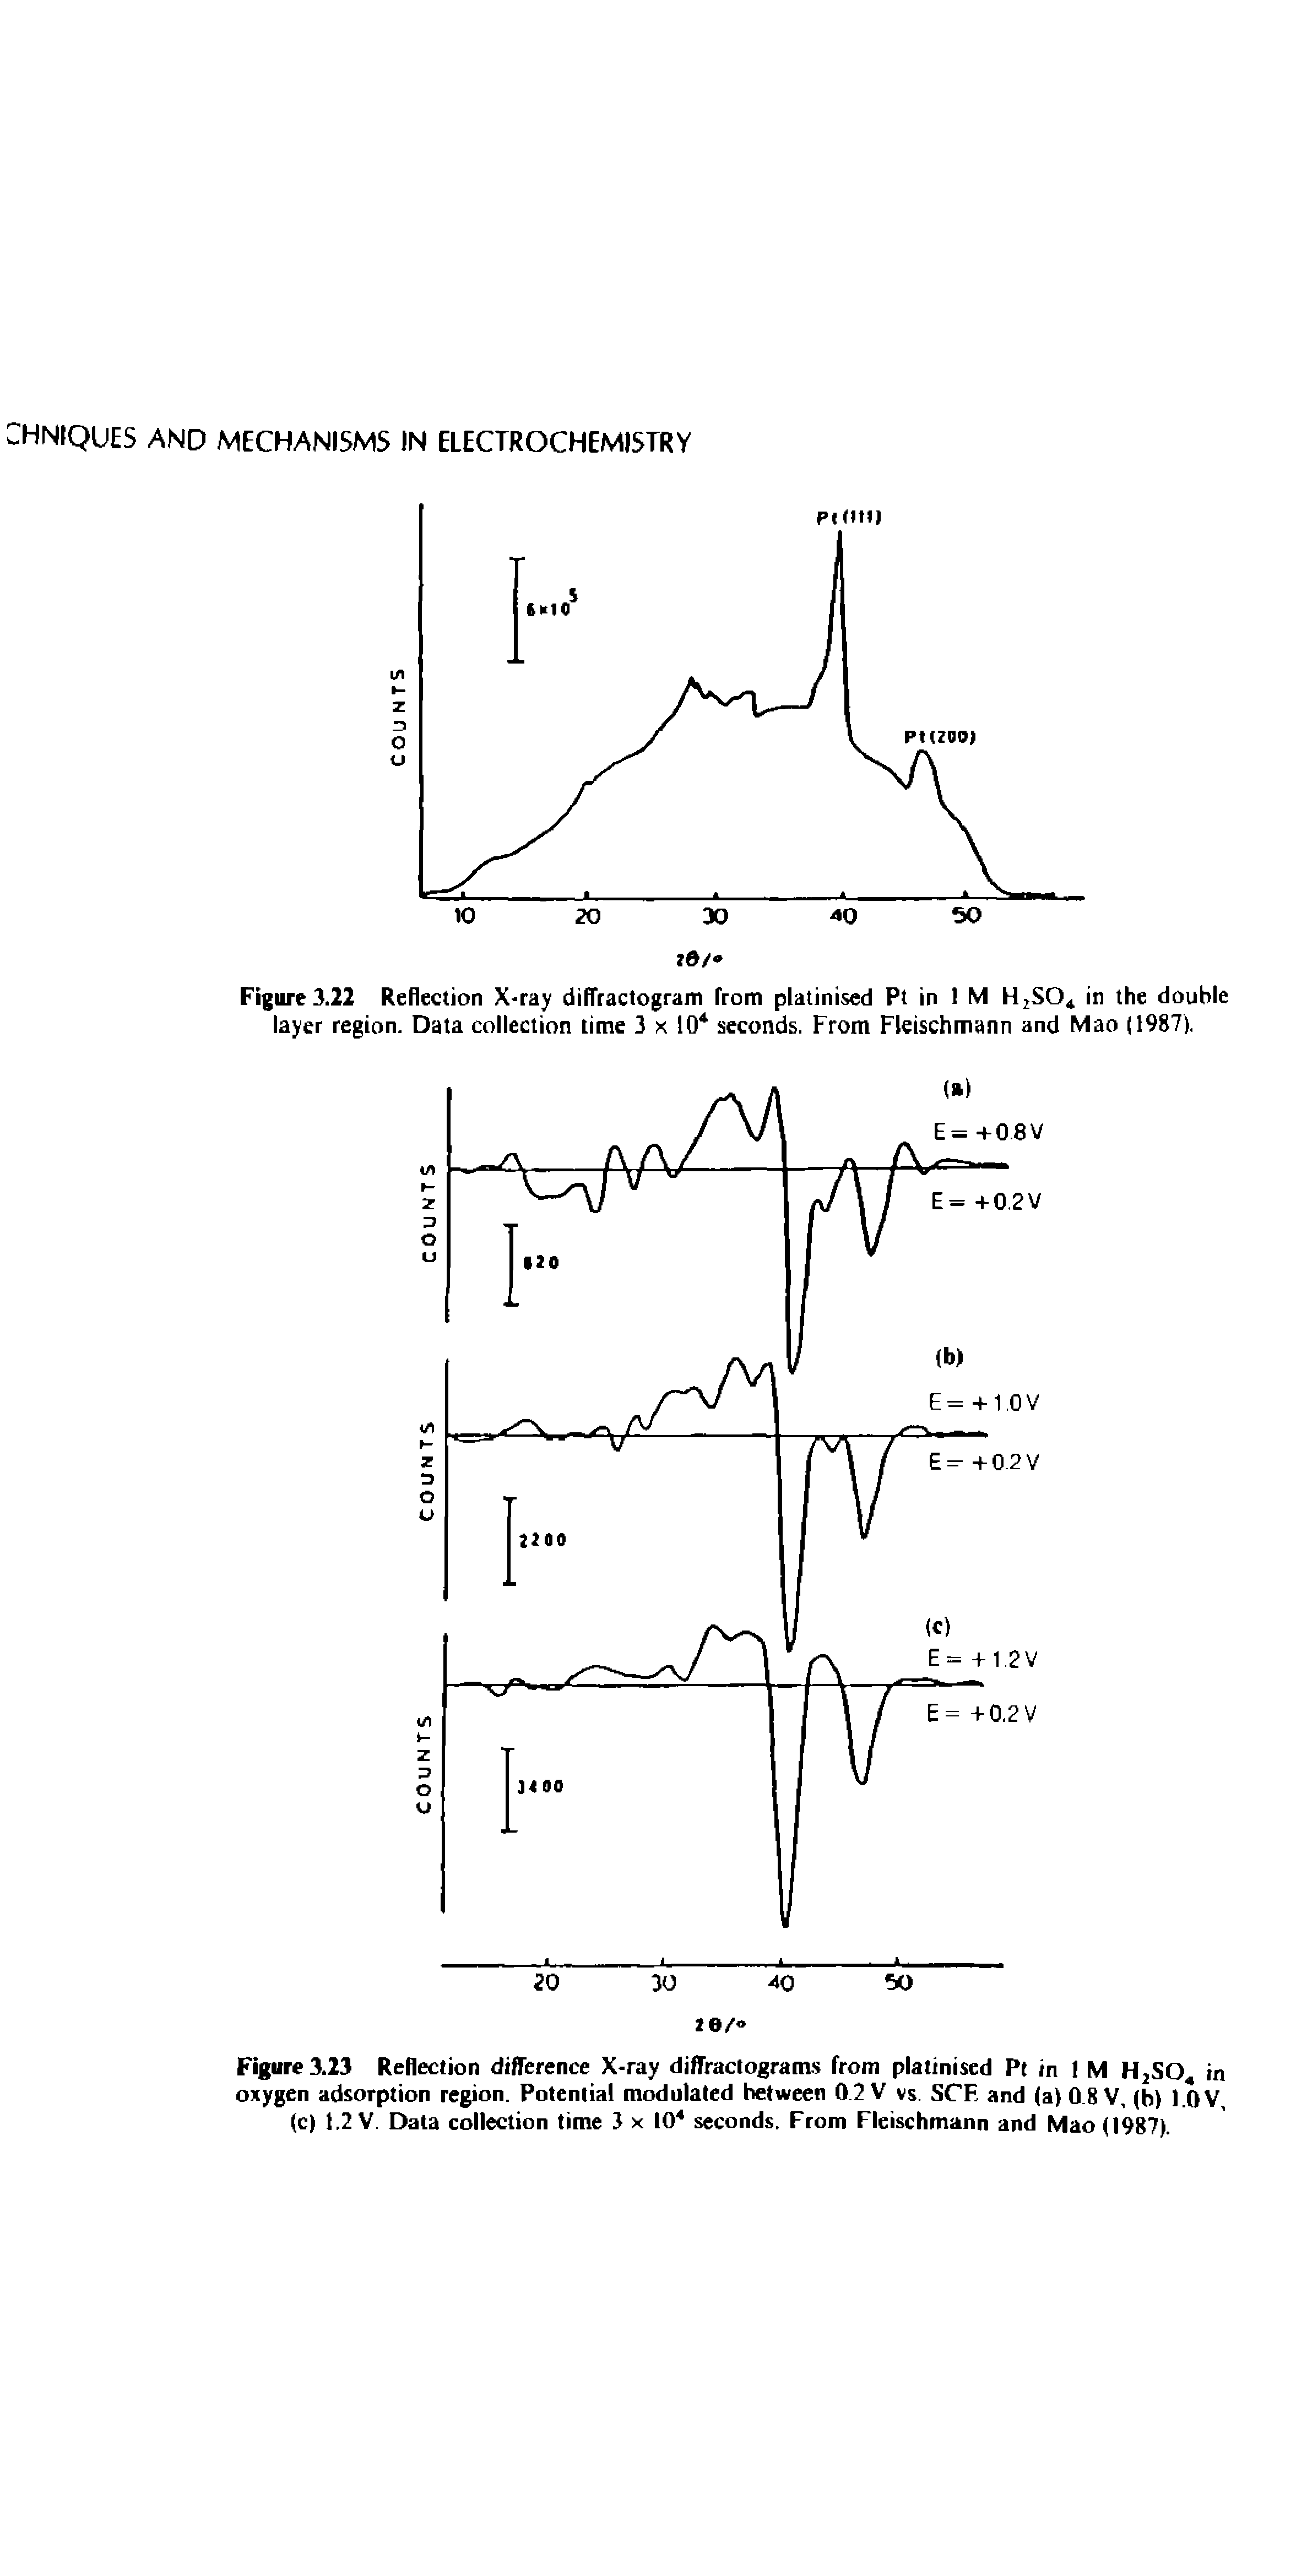 Figure 3.22 Reflection X-ray dilTractogram from platinised Pt in 1 M H2S04 in the double layer region. Data collection time 3 x 104 seconds. From Fleischmann and Mao (1987).